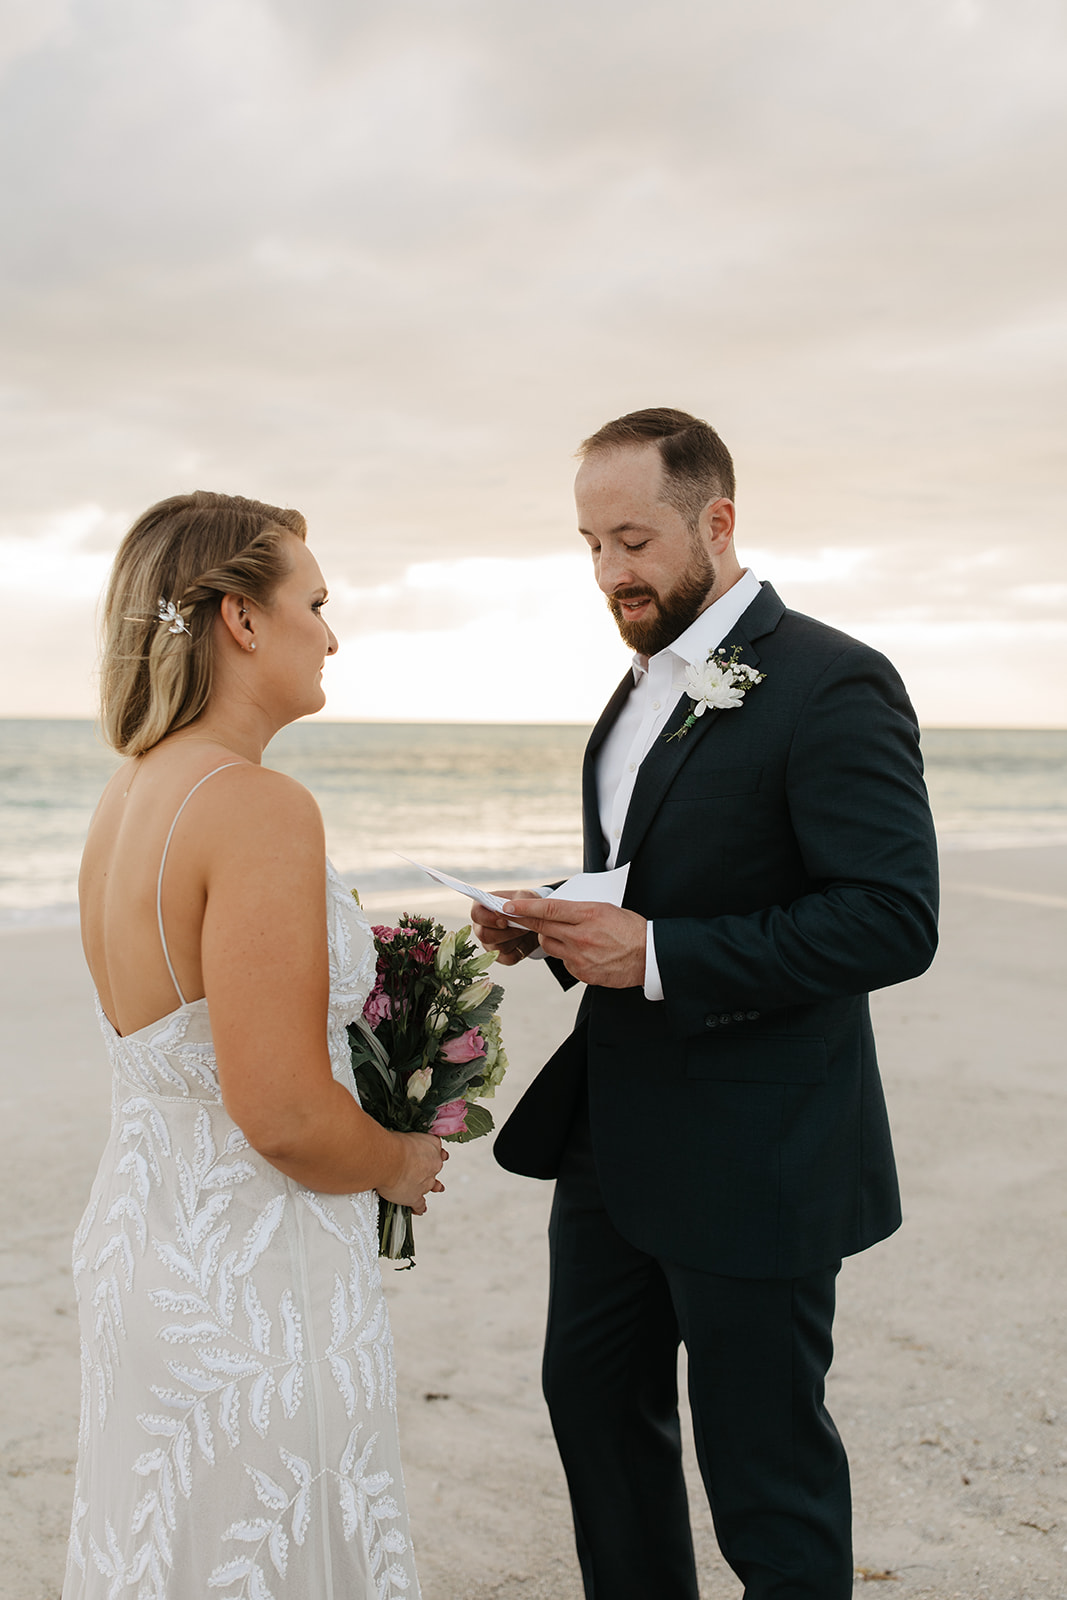 the groom reading his vows to his bride at Anna Maria Island in Florida